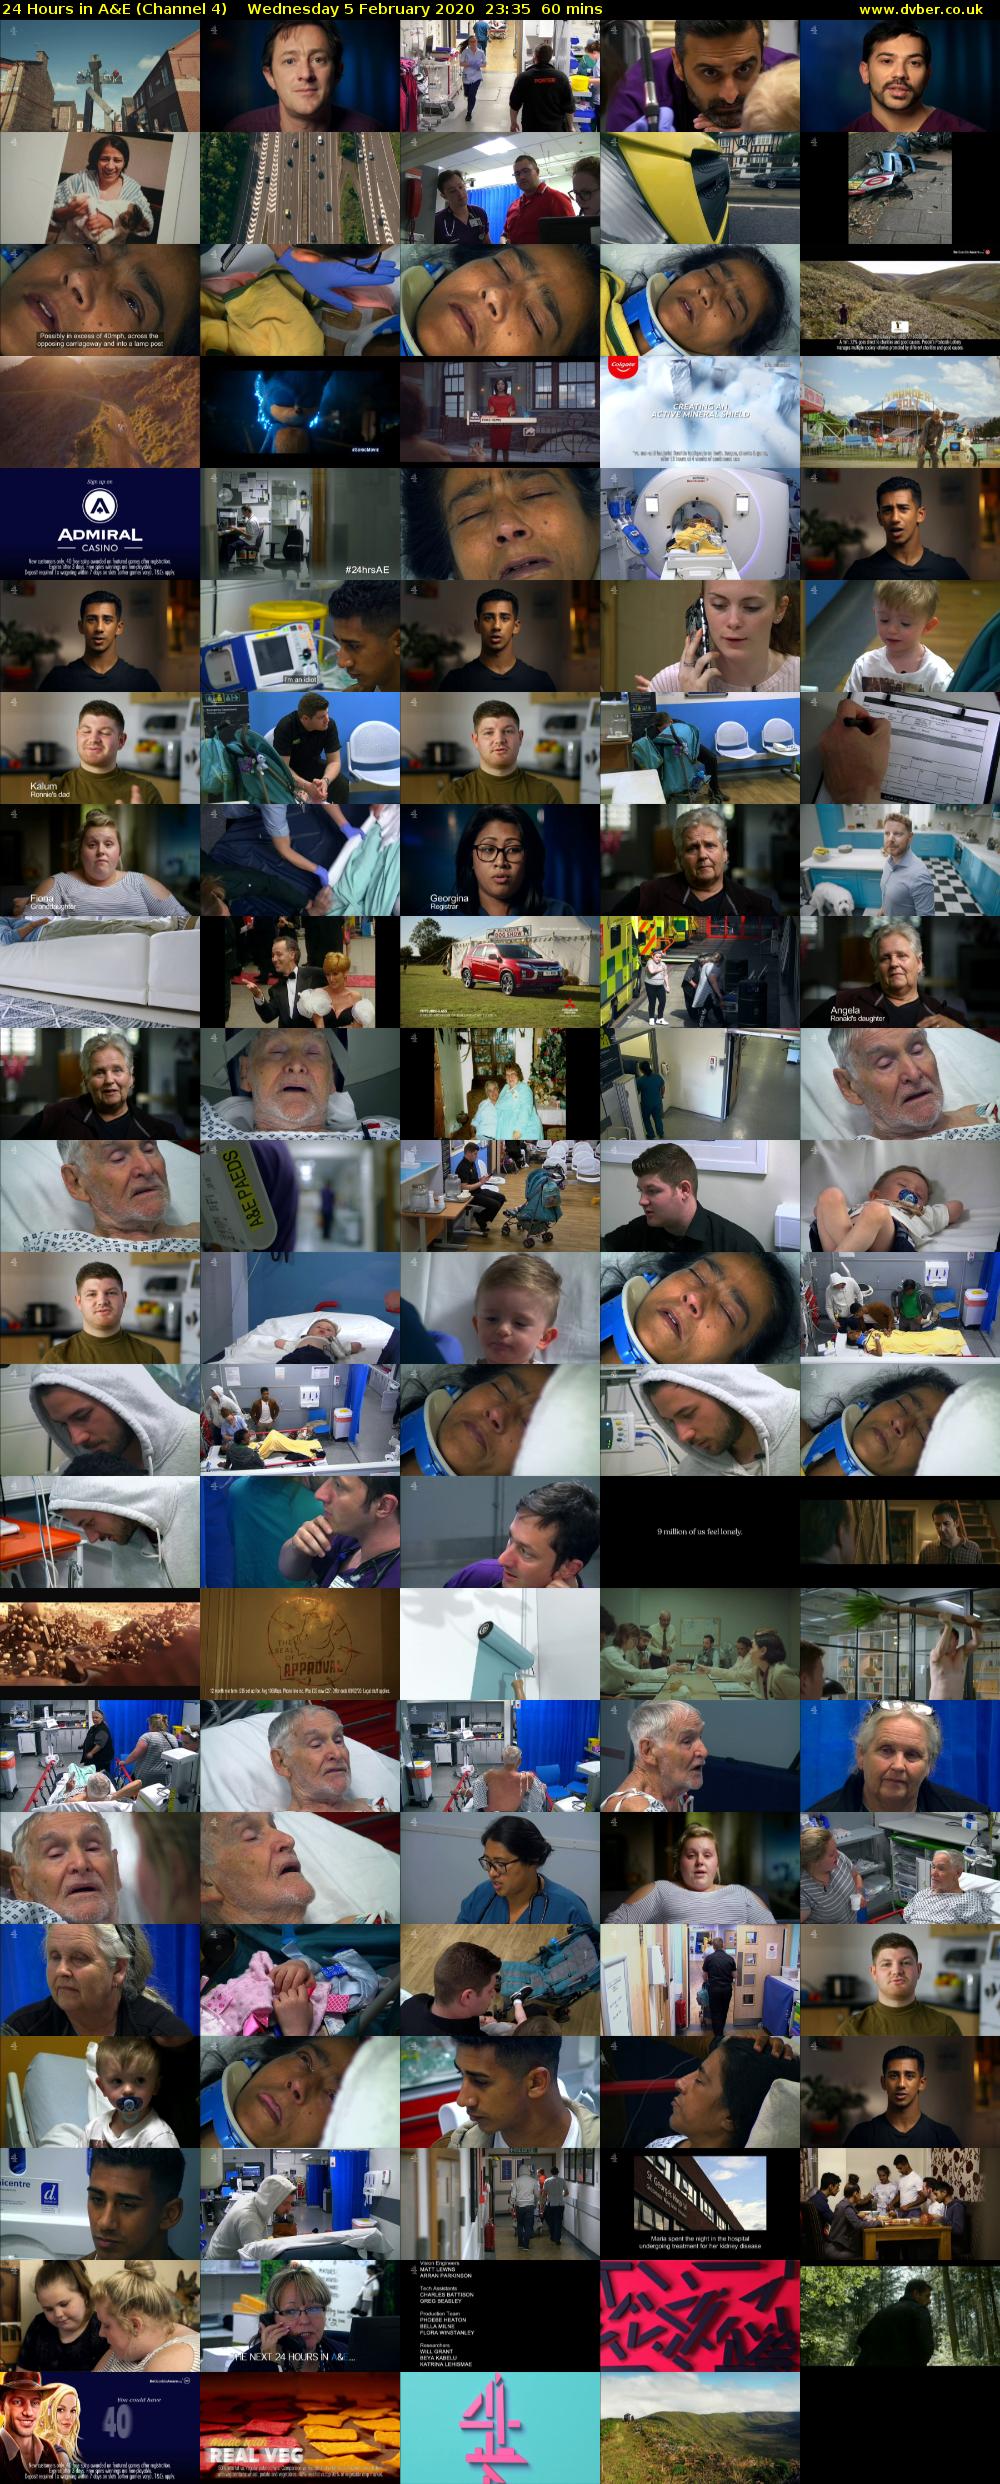 24 Hours in A&E (Channel 4) Wednesday 5 February 2020 23:35 - 00:35